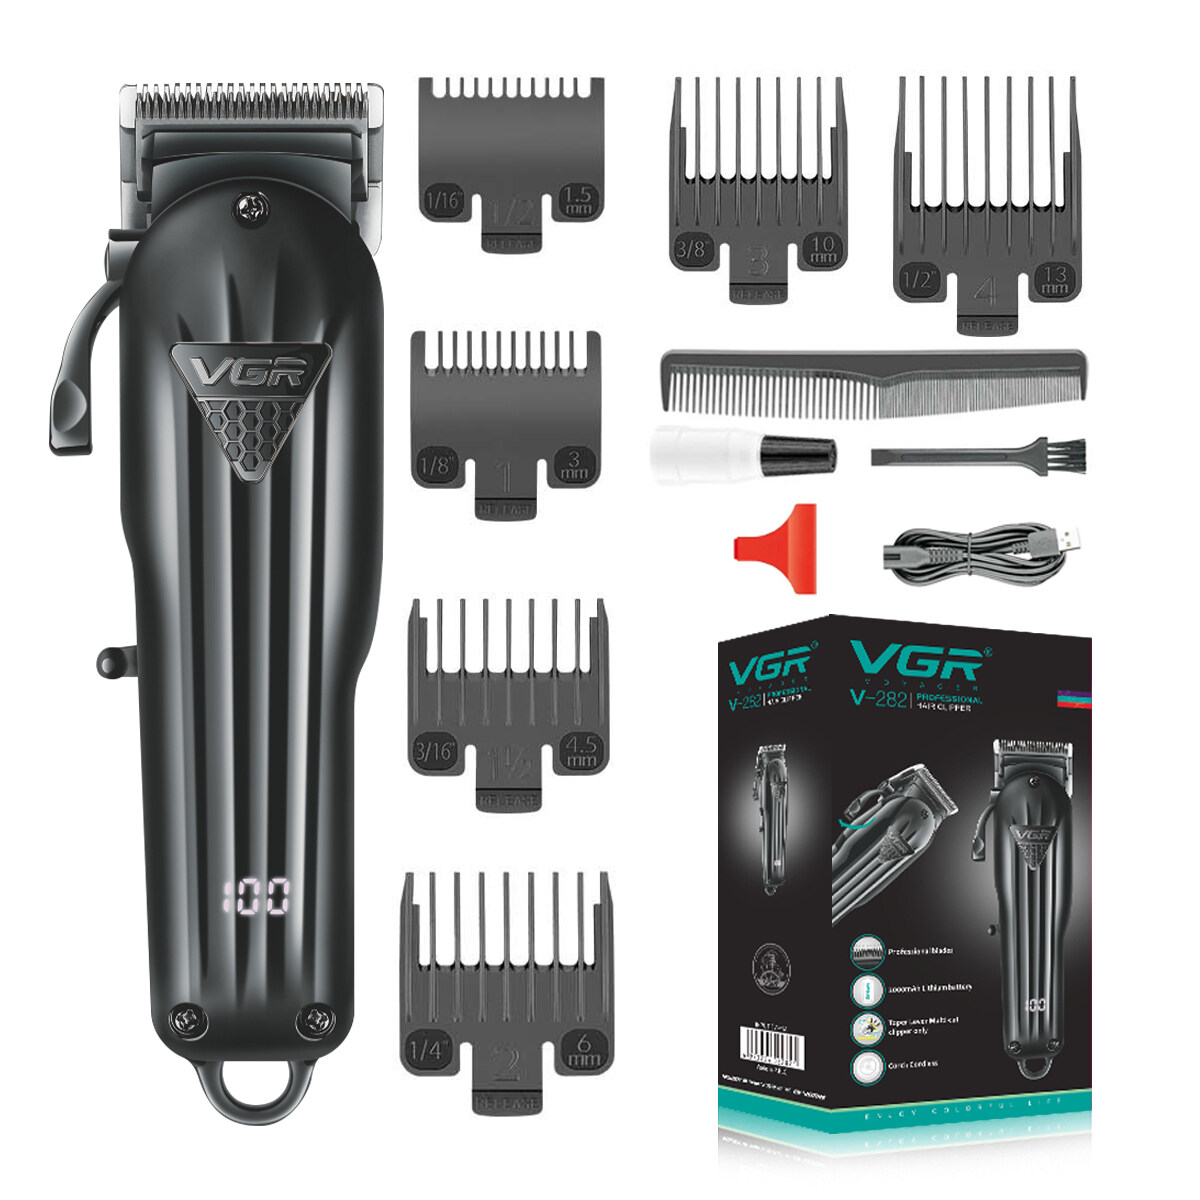 hair trimmer factory, hair trimmer made in china, hair trimmer oem, Adjustable Cordless Trimmer suppliers, wholesale Rechargeable Hair Clipper